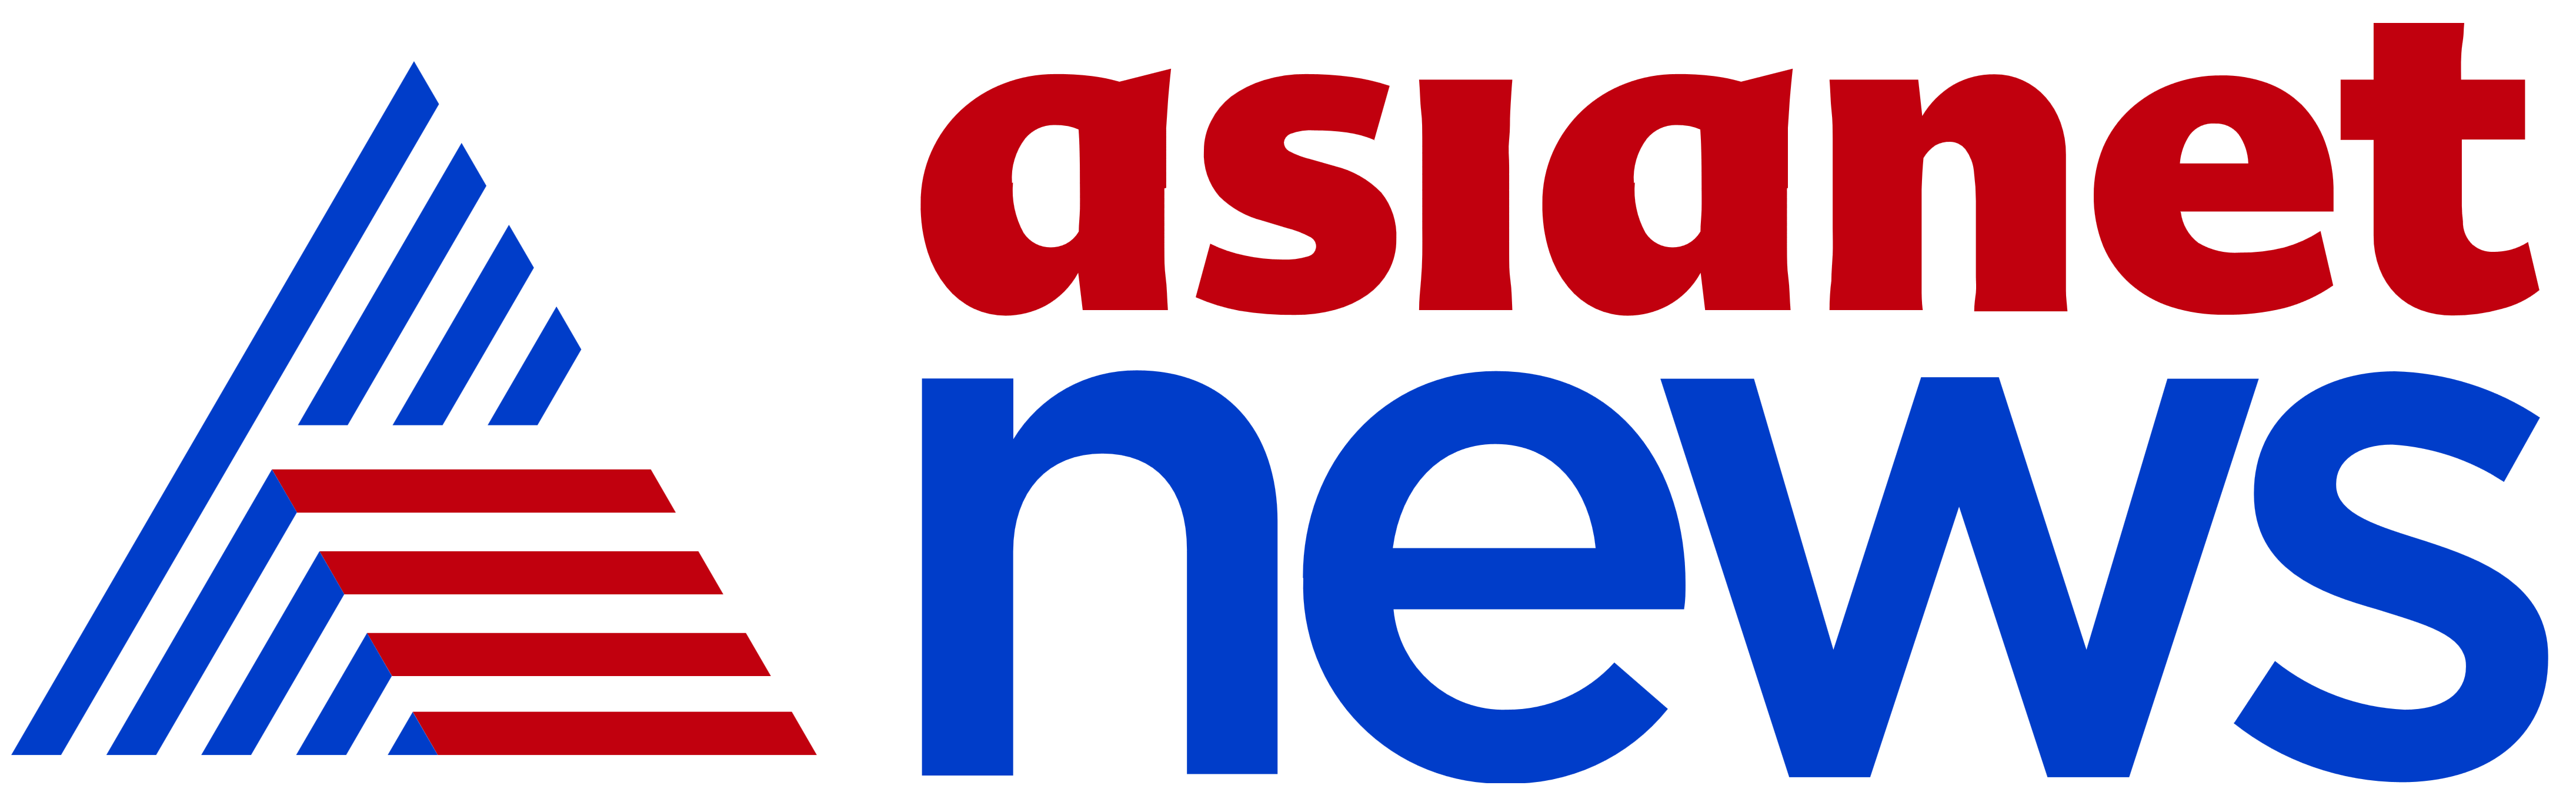 Asianet News Media and Entertainment Private Limited